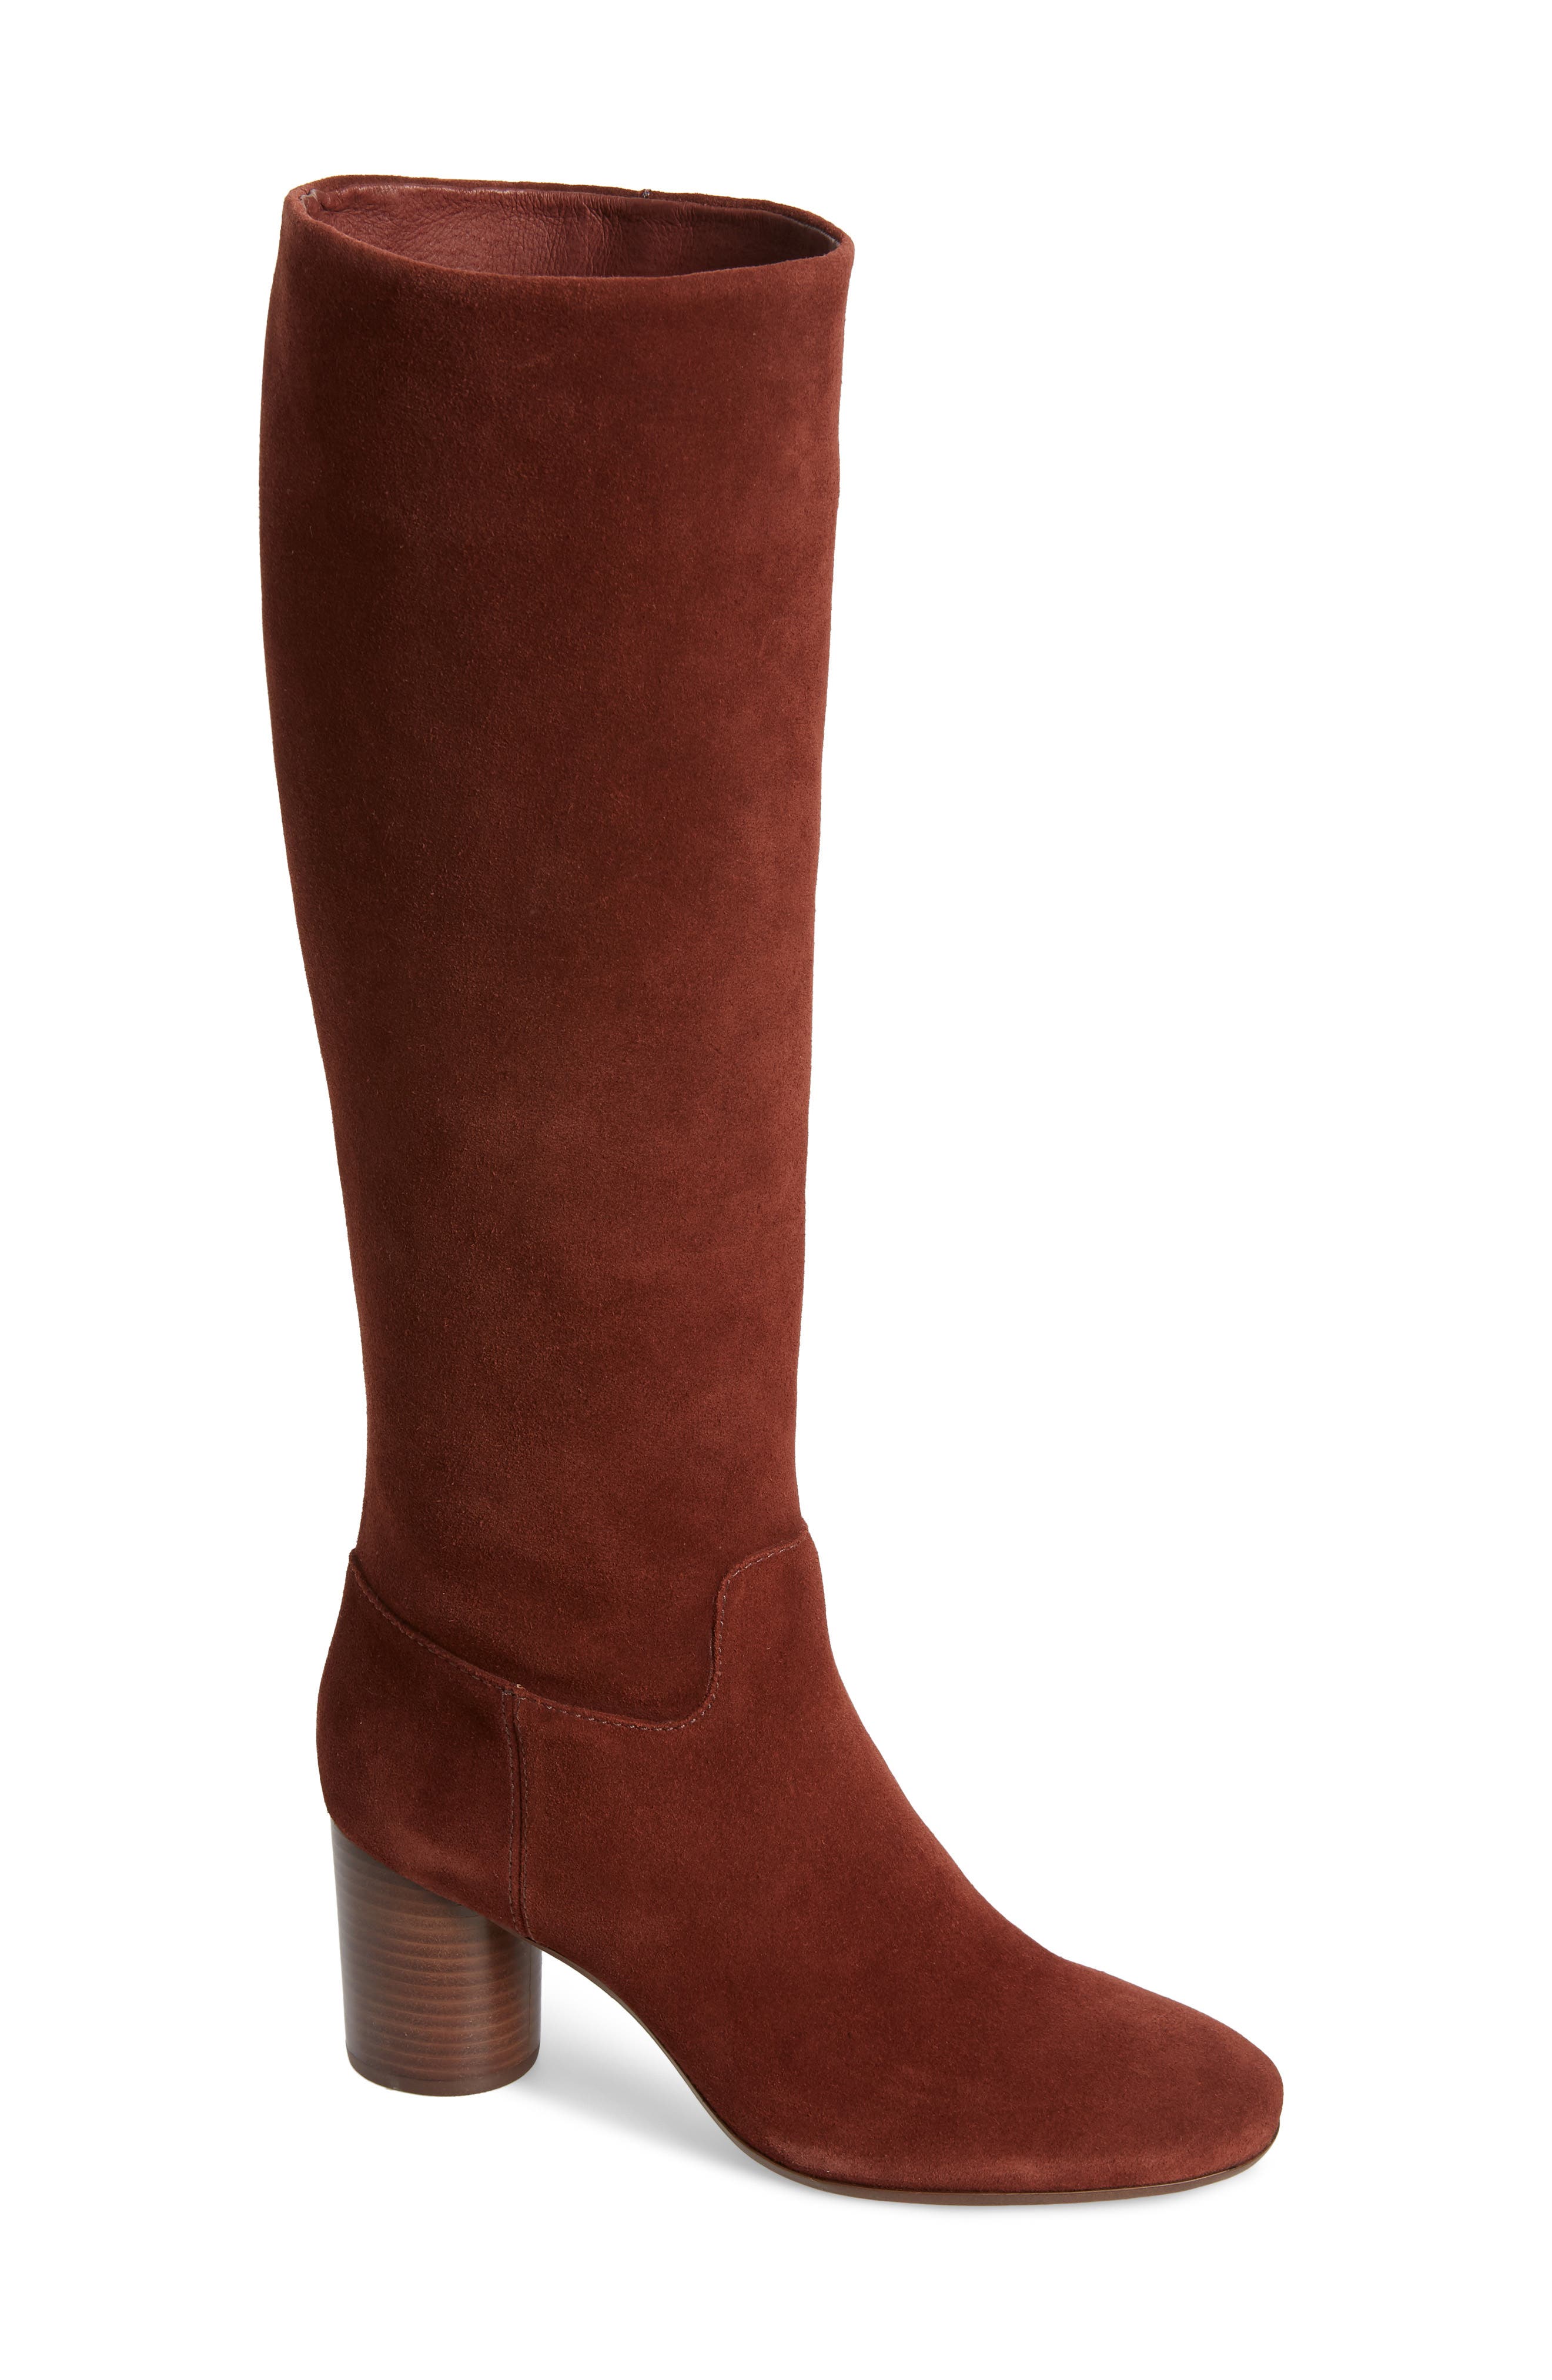 Madewell | The Scarlet Knee High Boot 